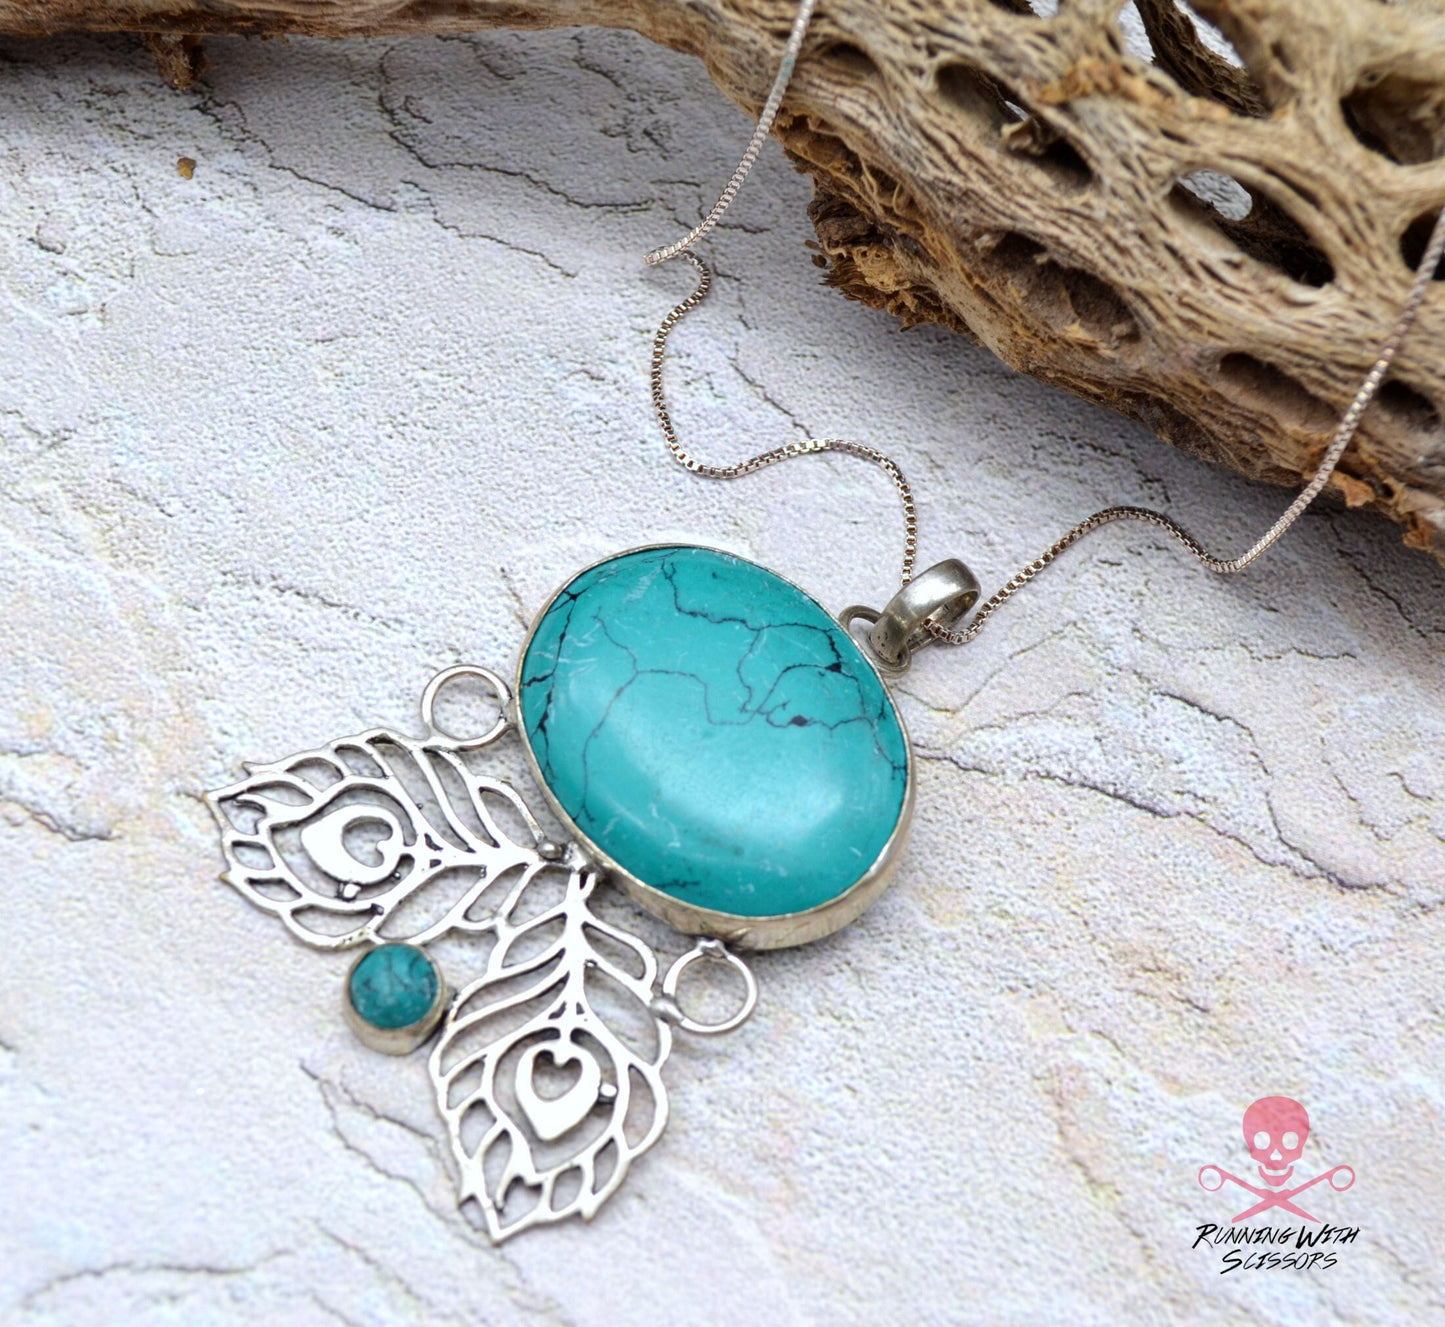 SALE Turquoise Beauty Necklace 925 Sterling Silver